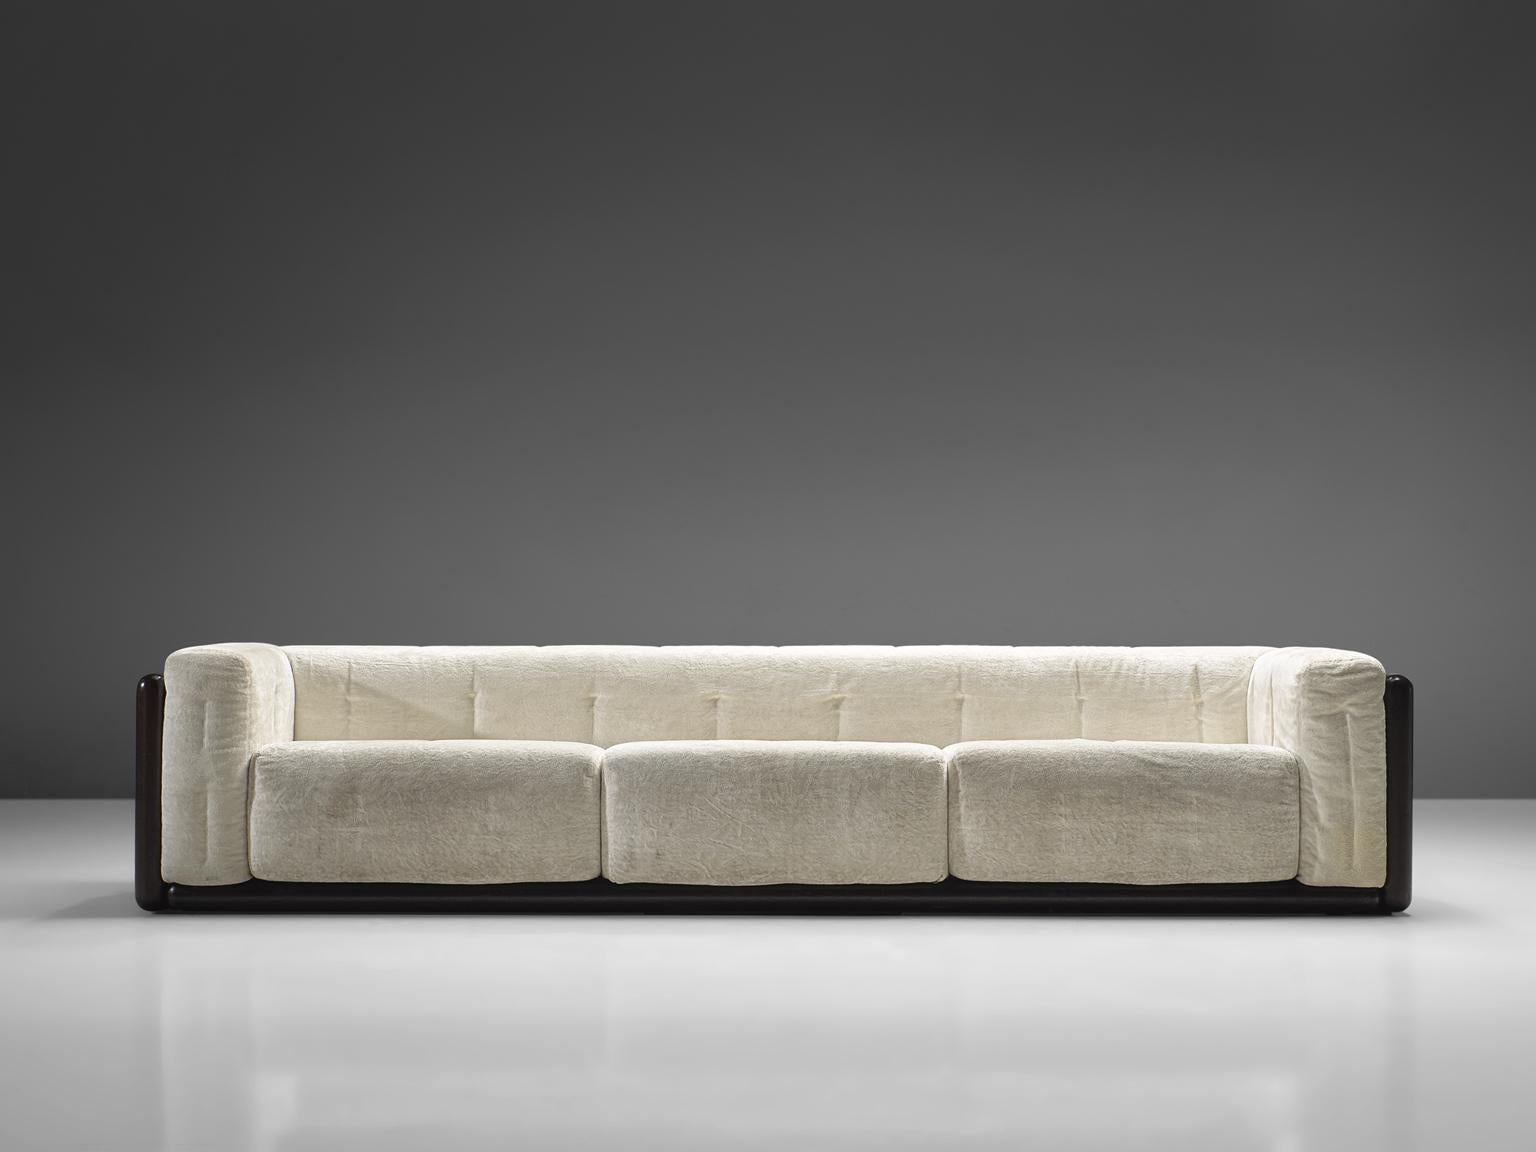 Carlo Scarpa for Simon, 'Cornaro' sofa, white velvet fabric, wood, Italy, 1973

The sofa has a very thick cushion and is upholstered with white fabric. The sofa has a relatively thin back and armrests compared to the seat. The frame is made out of